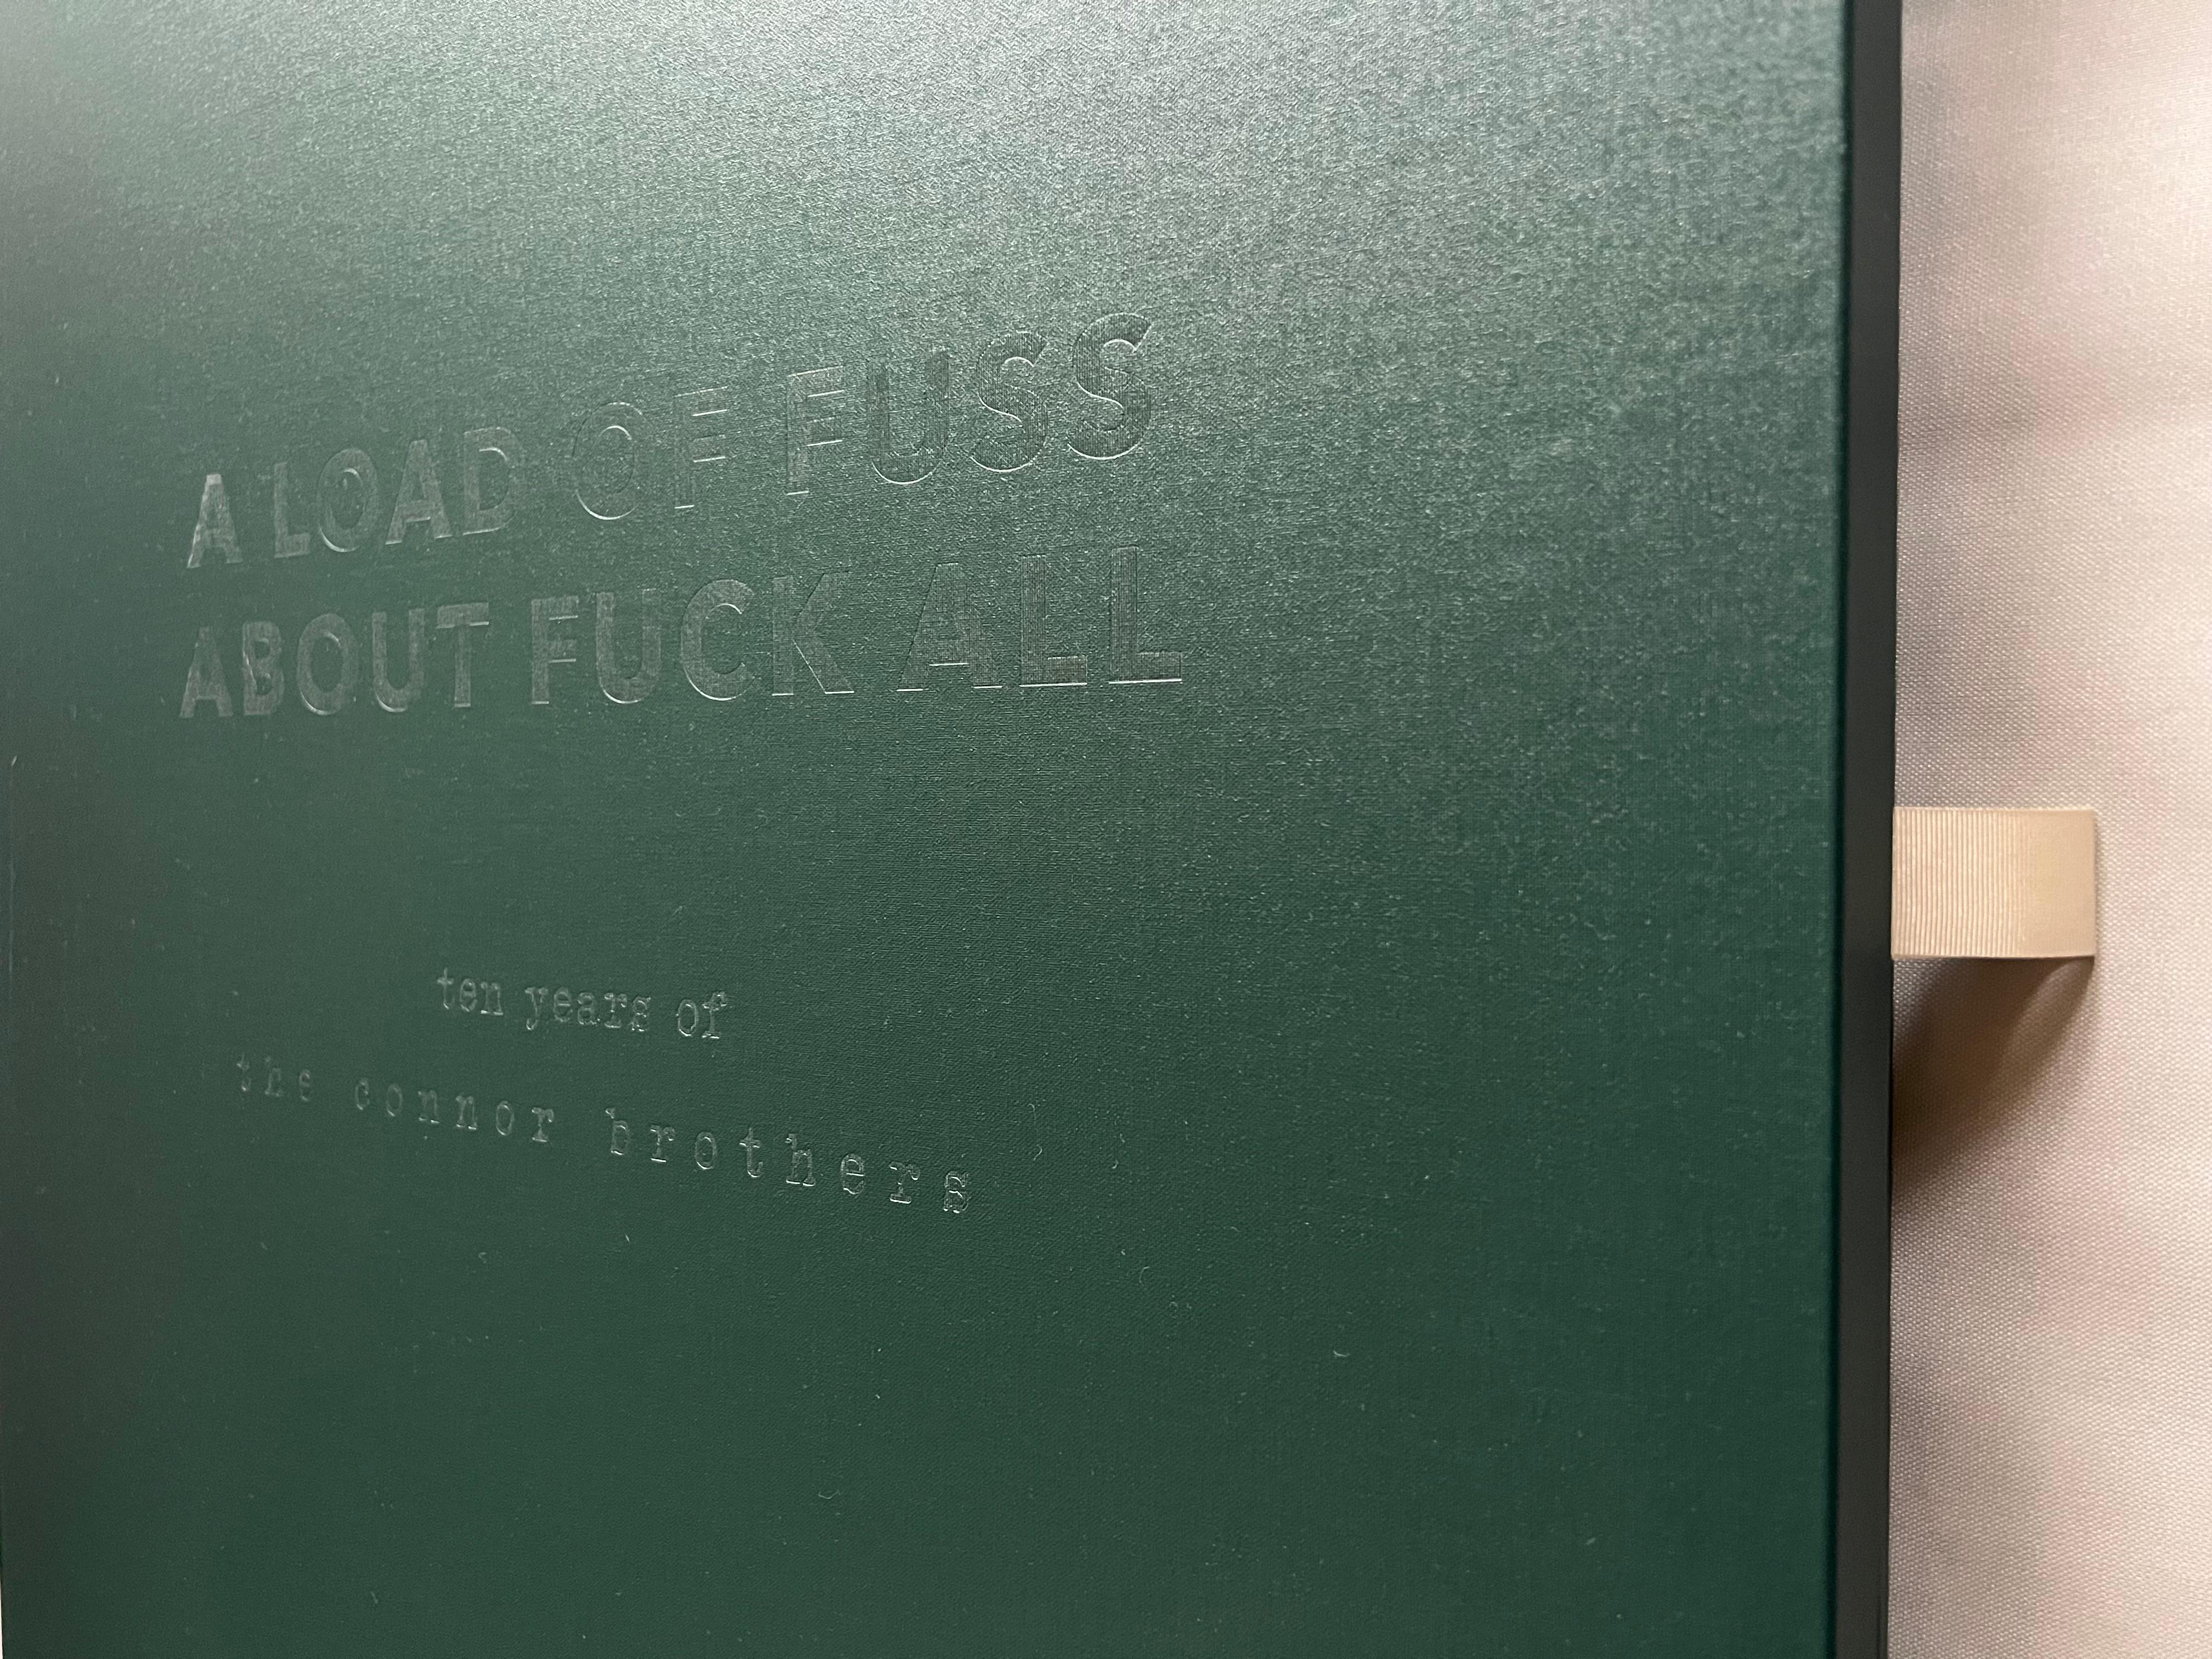 A Load of Fuss...10 year Commemorative Box Set by The Connor Brothers For Sale 1